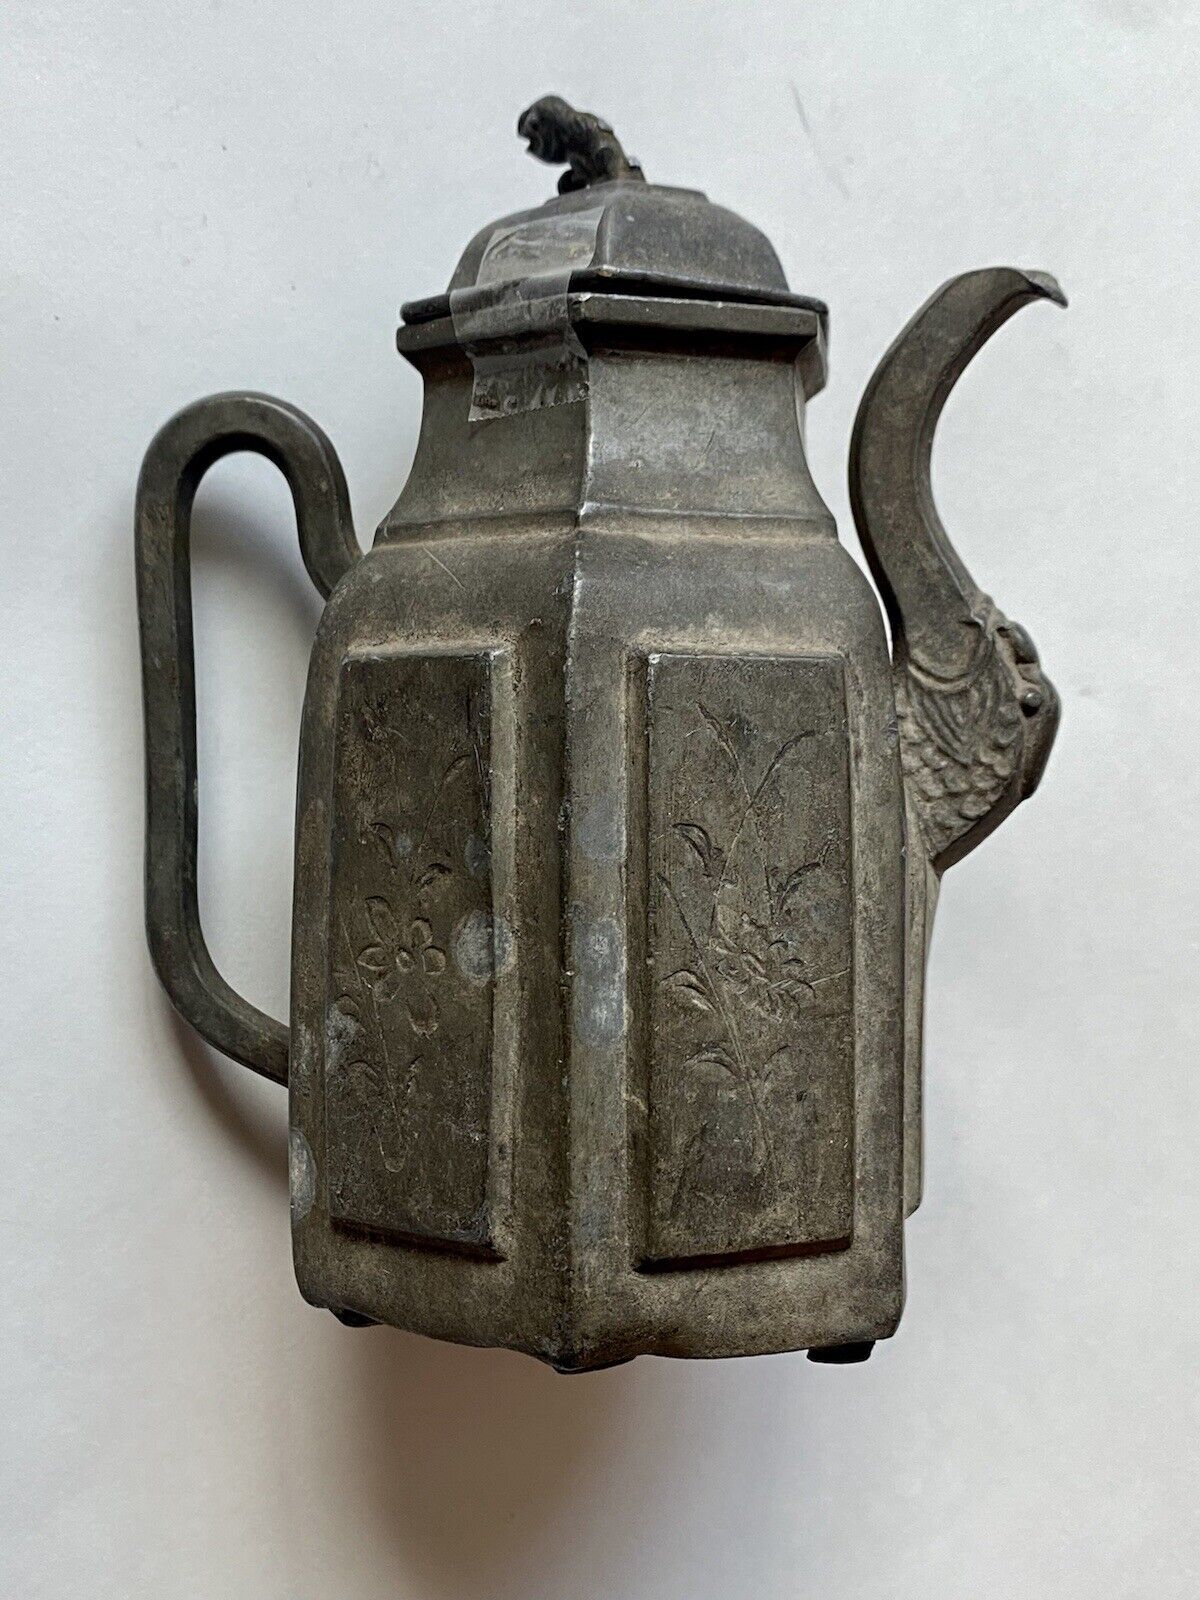 Antique Asian  (Japanese, Chinese) Pewter Teapot - 1920’s - Makers Mark Wax Seal